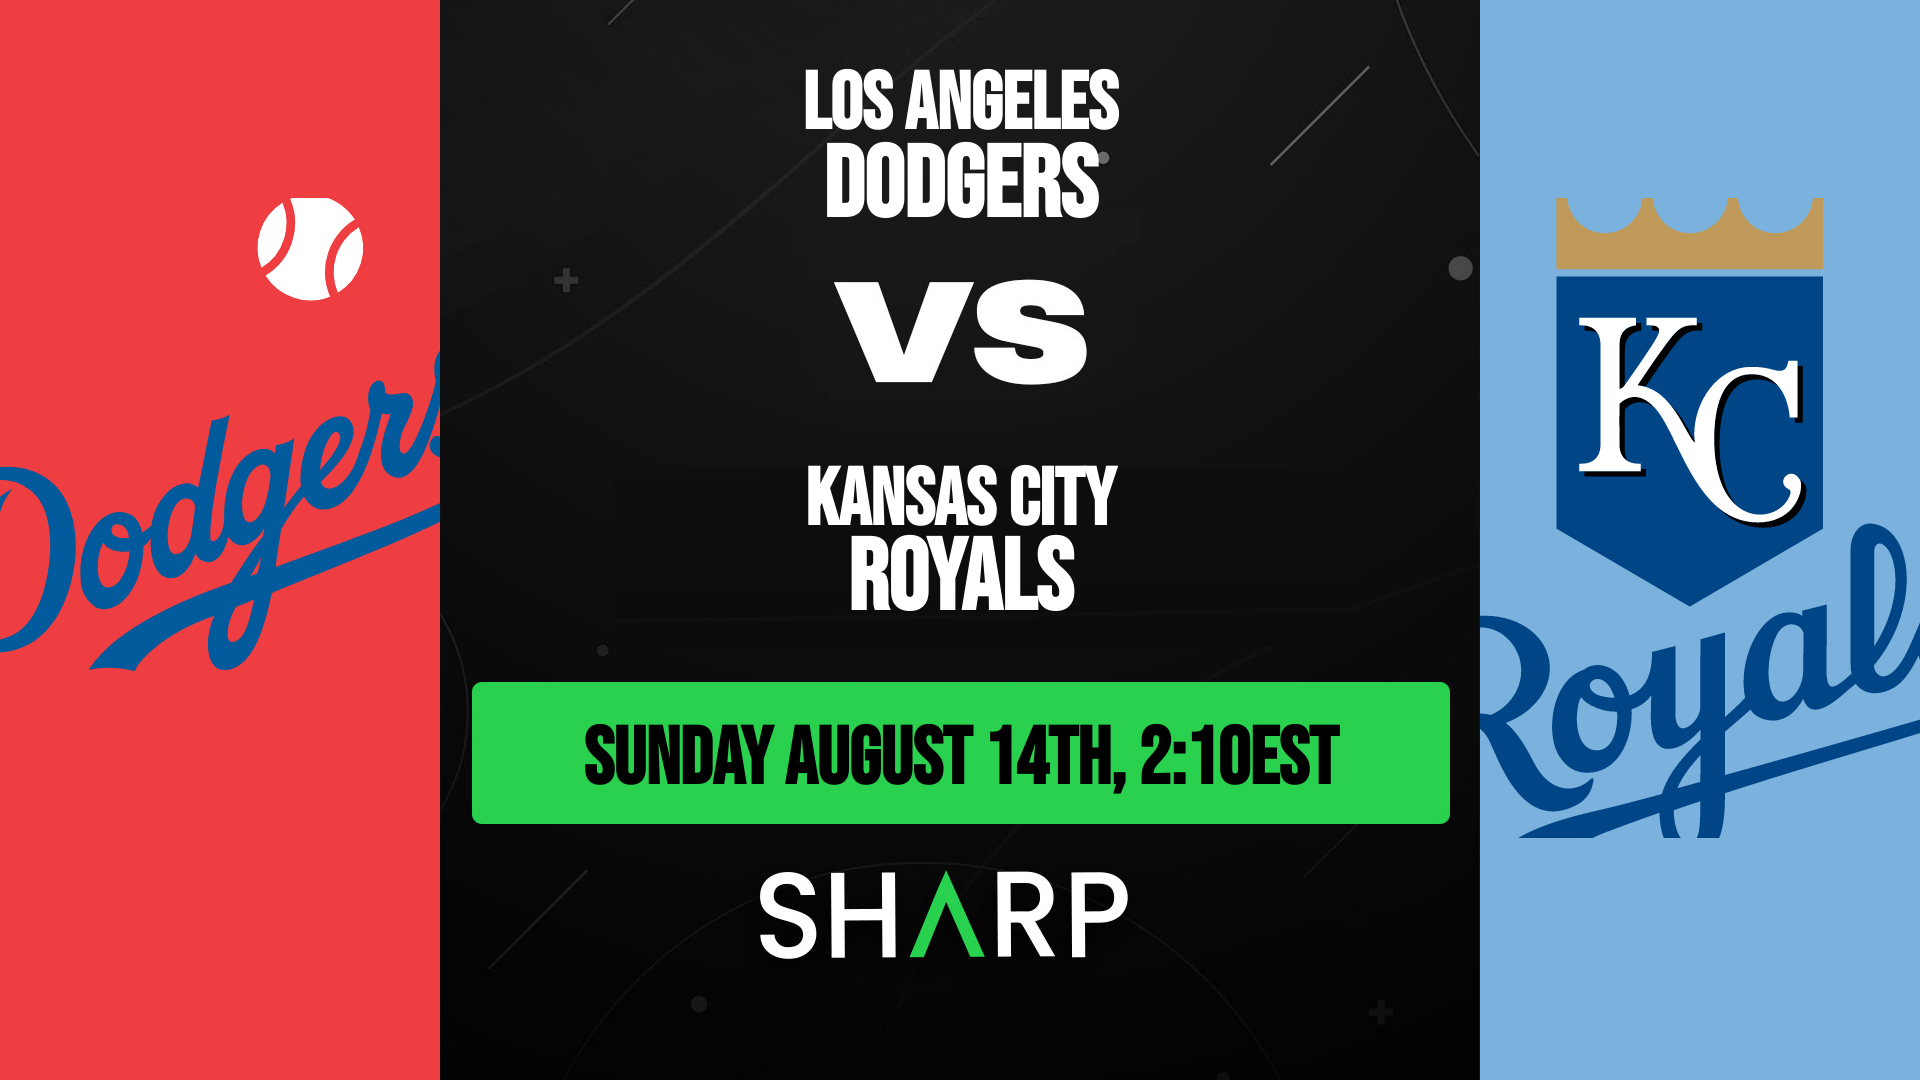 Los Angeles Dodgers @ Kansas City Royals Matchup Preview - August 14th, 2022